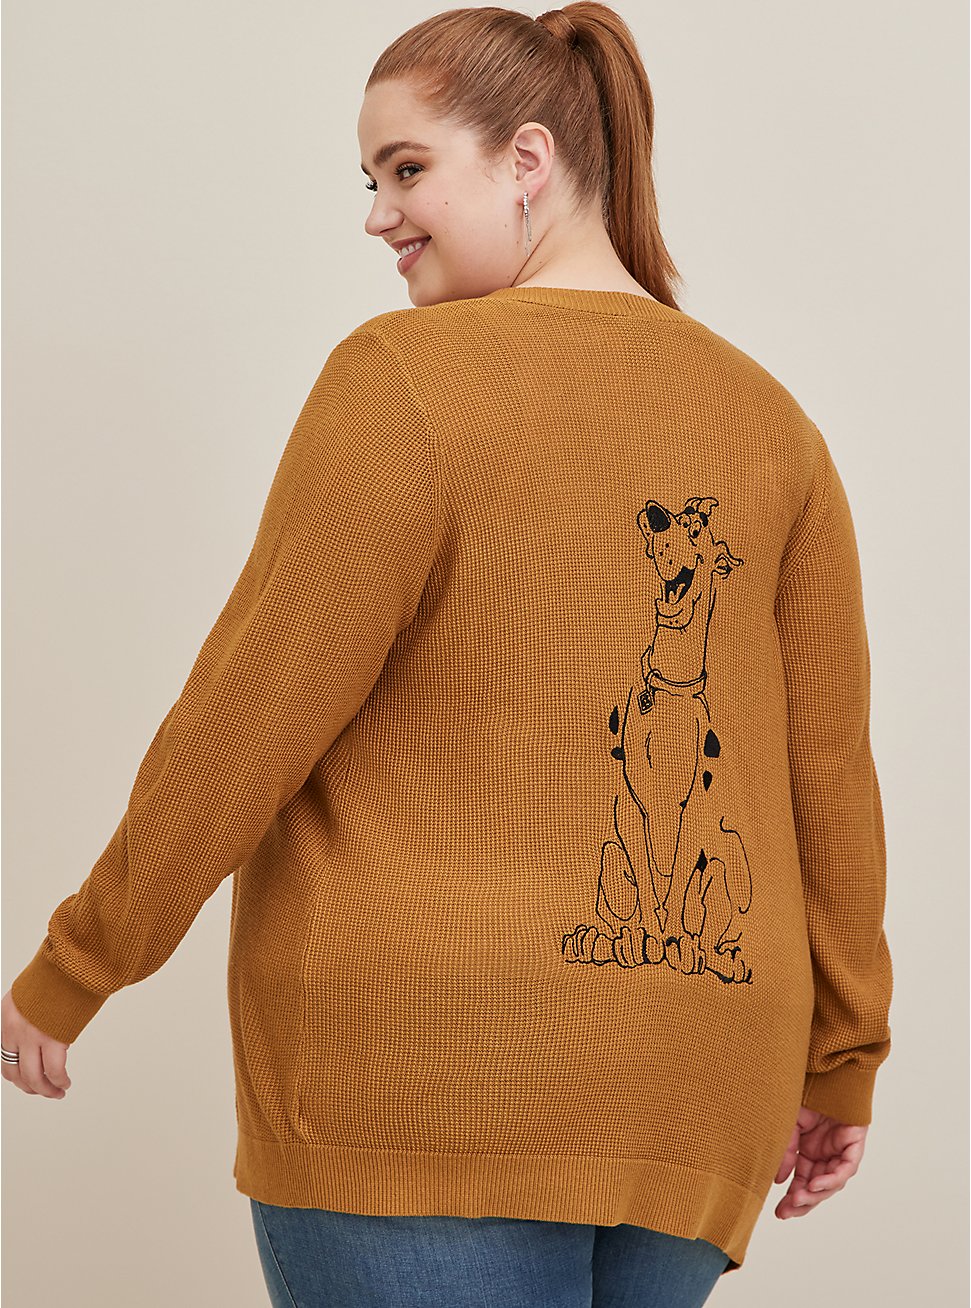 Plus Size Scooby Doo Scooby Cardigan Open Front Sweater, BROWN, hi-res